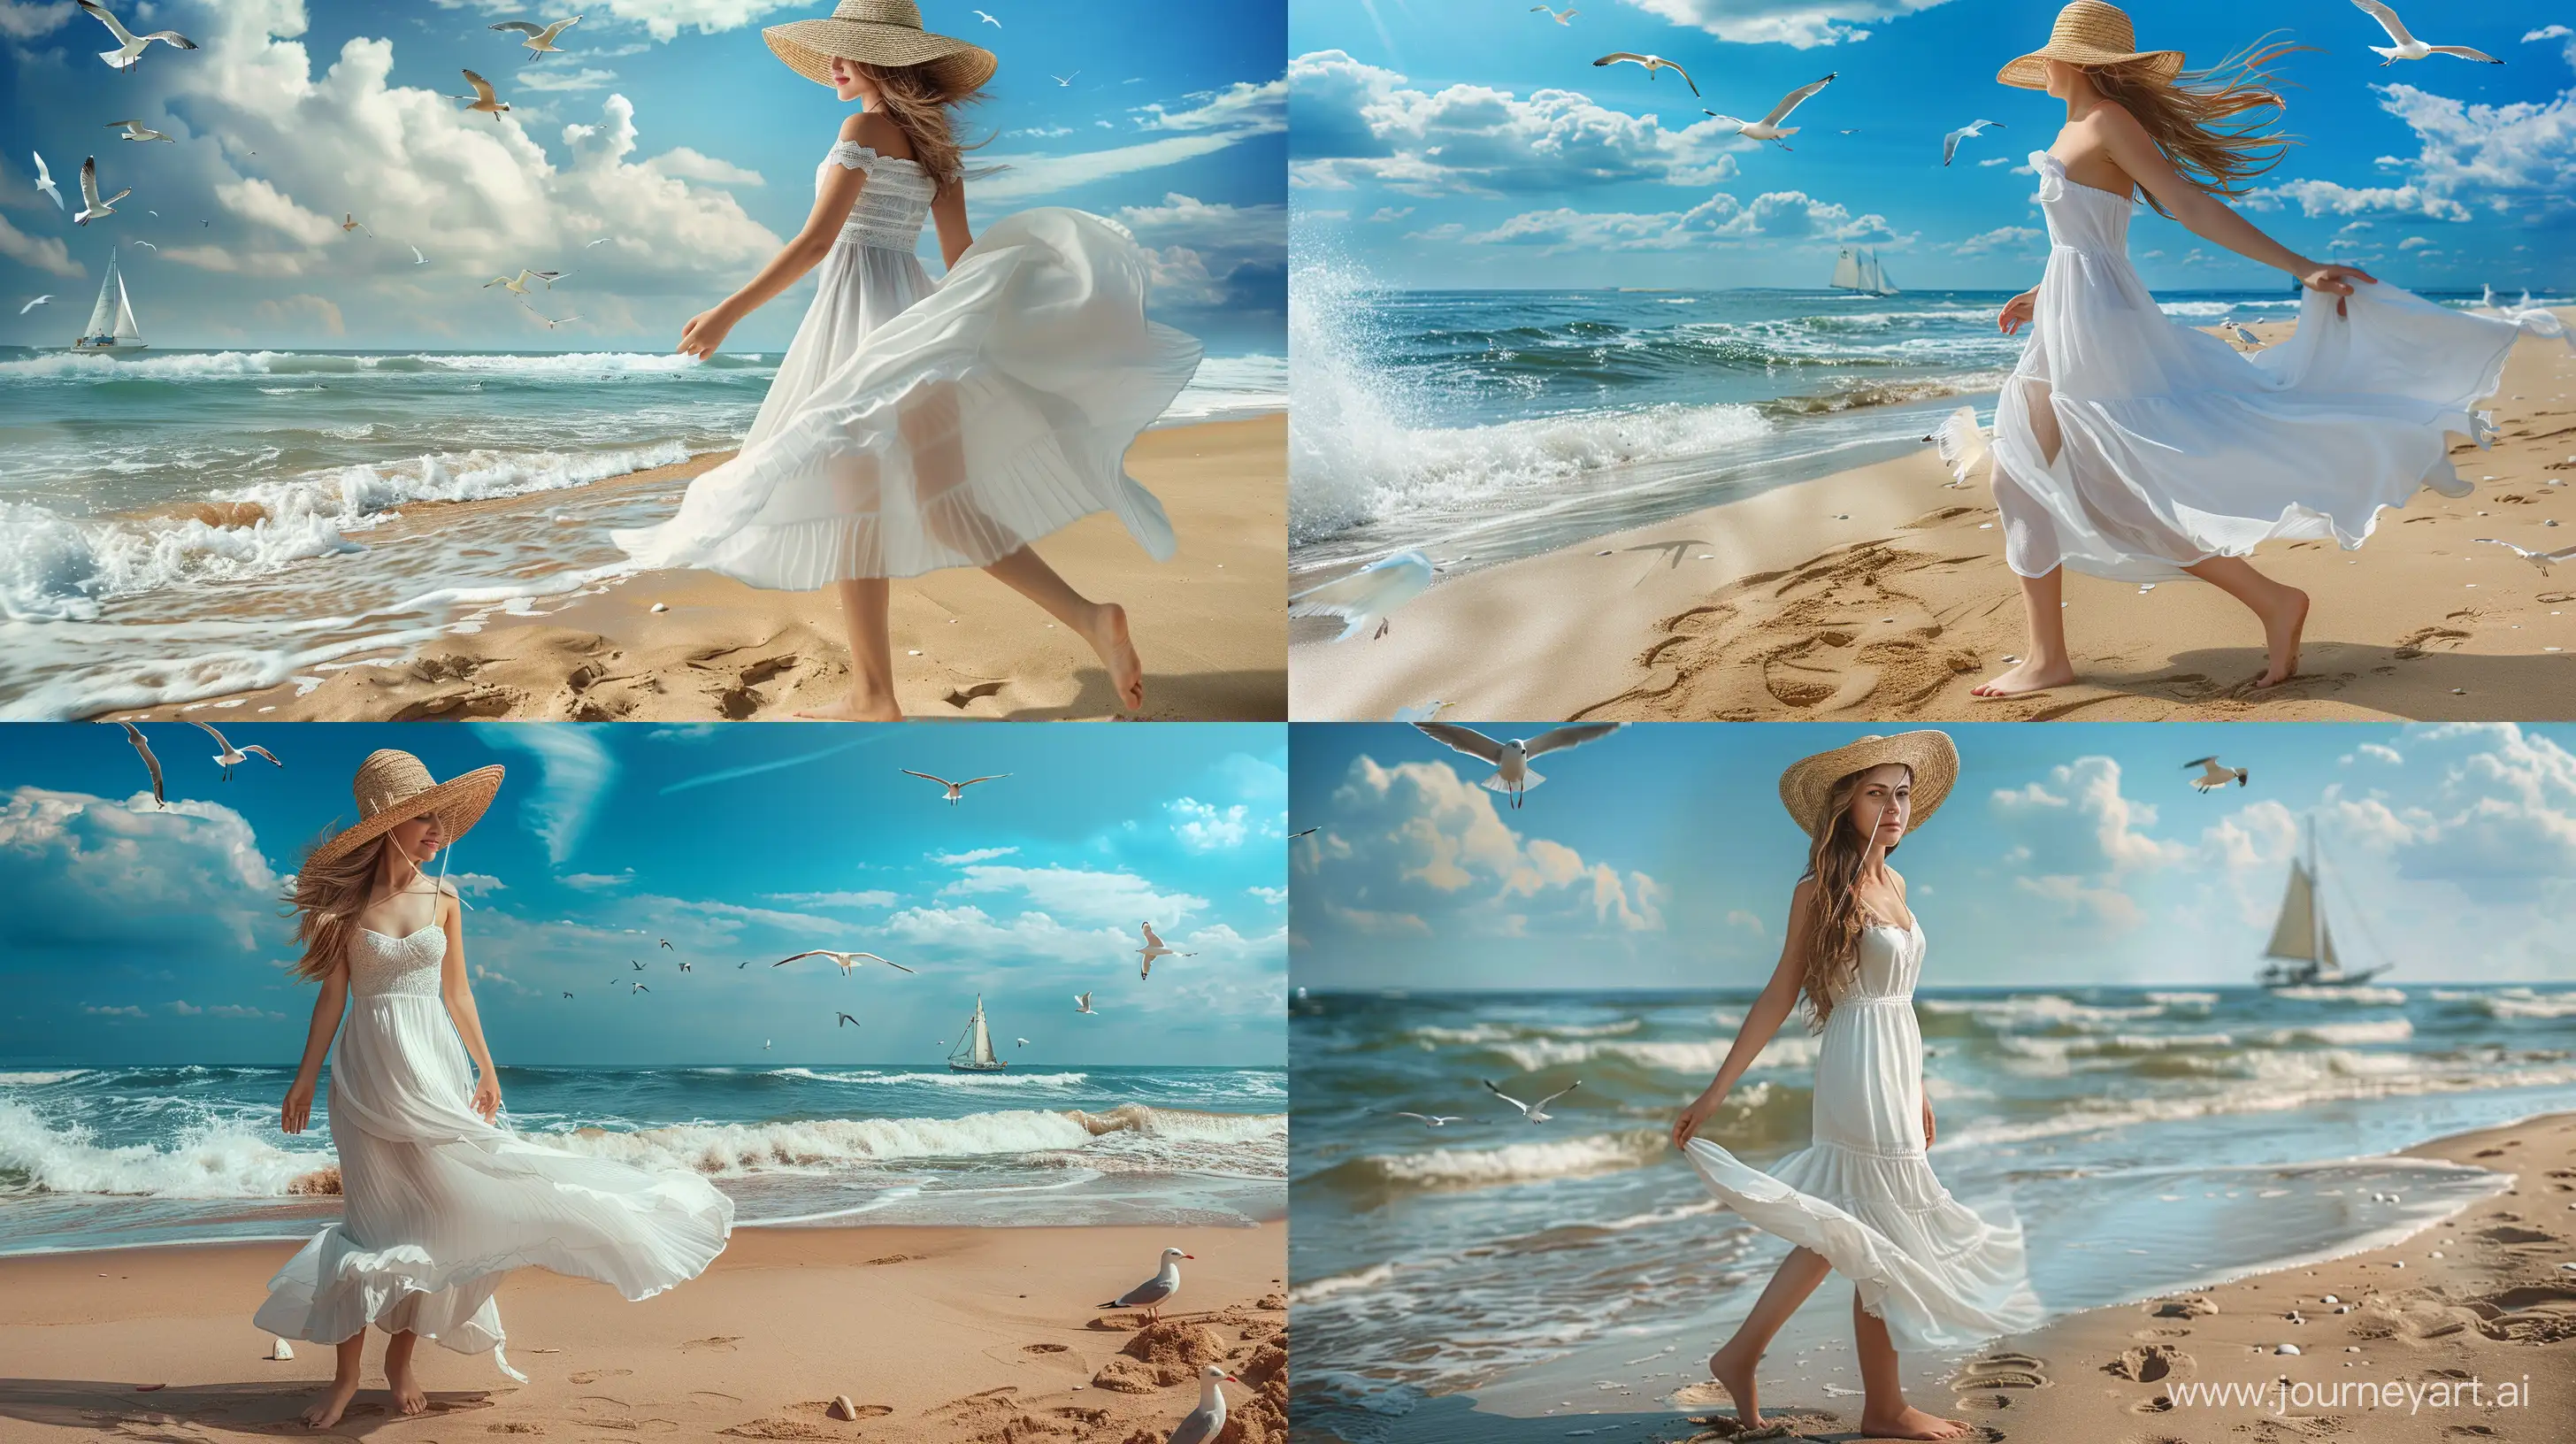 young woman on a sandy beach, wearing a straw hat and a flowing white dress, graceful and carefree, bare feet leaving imprints on the warm sand, waves gently crashing on the shore, seagulls soaring in the azure sky, a distant sailboat on the horizon, capturing a sense of tranquility and freedom, a realistic photograph taken with a Canon EOS 5D Mark IV camera, 24-70mm lens, wide-angle shot showcasing the vastness of the seascape. --ar 16:9 